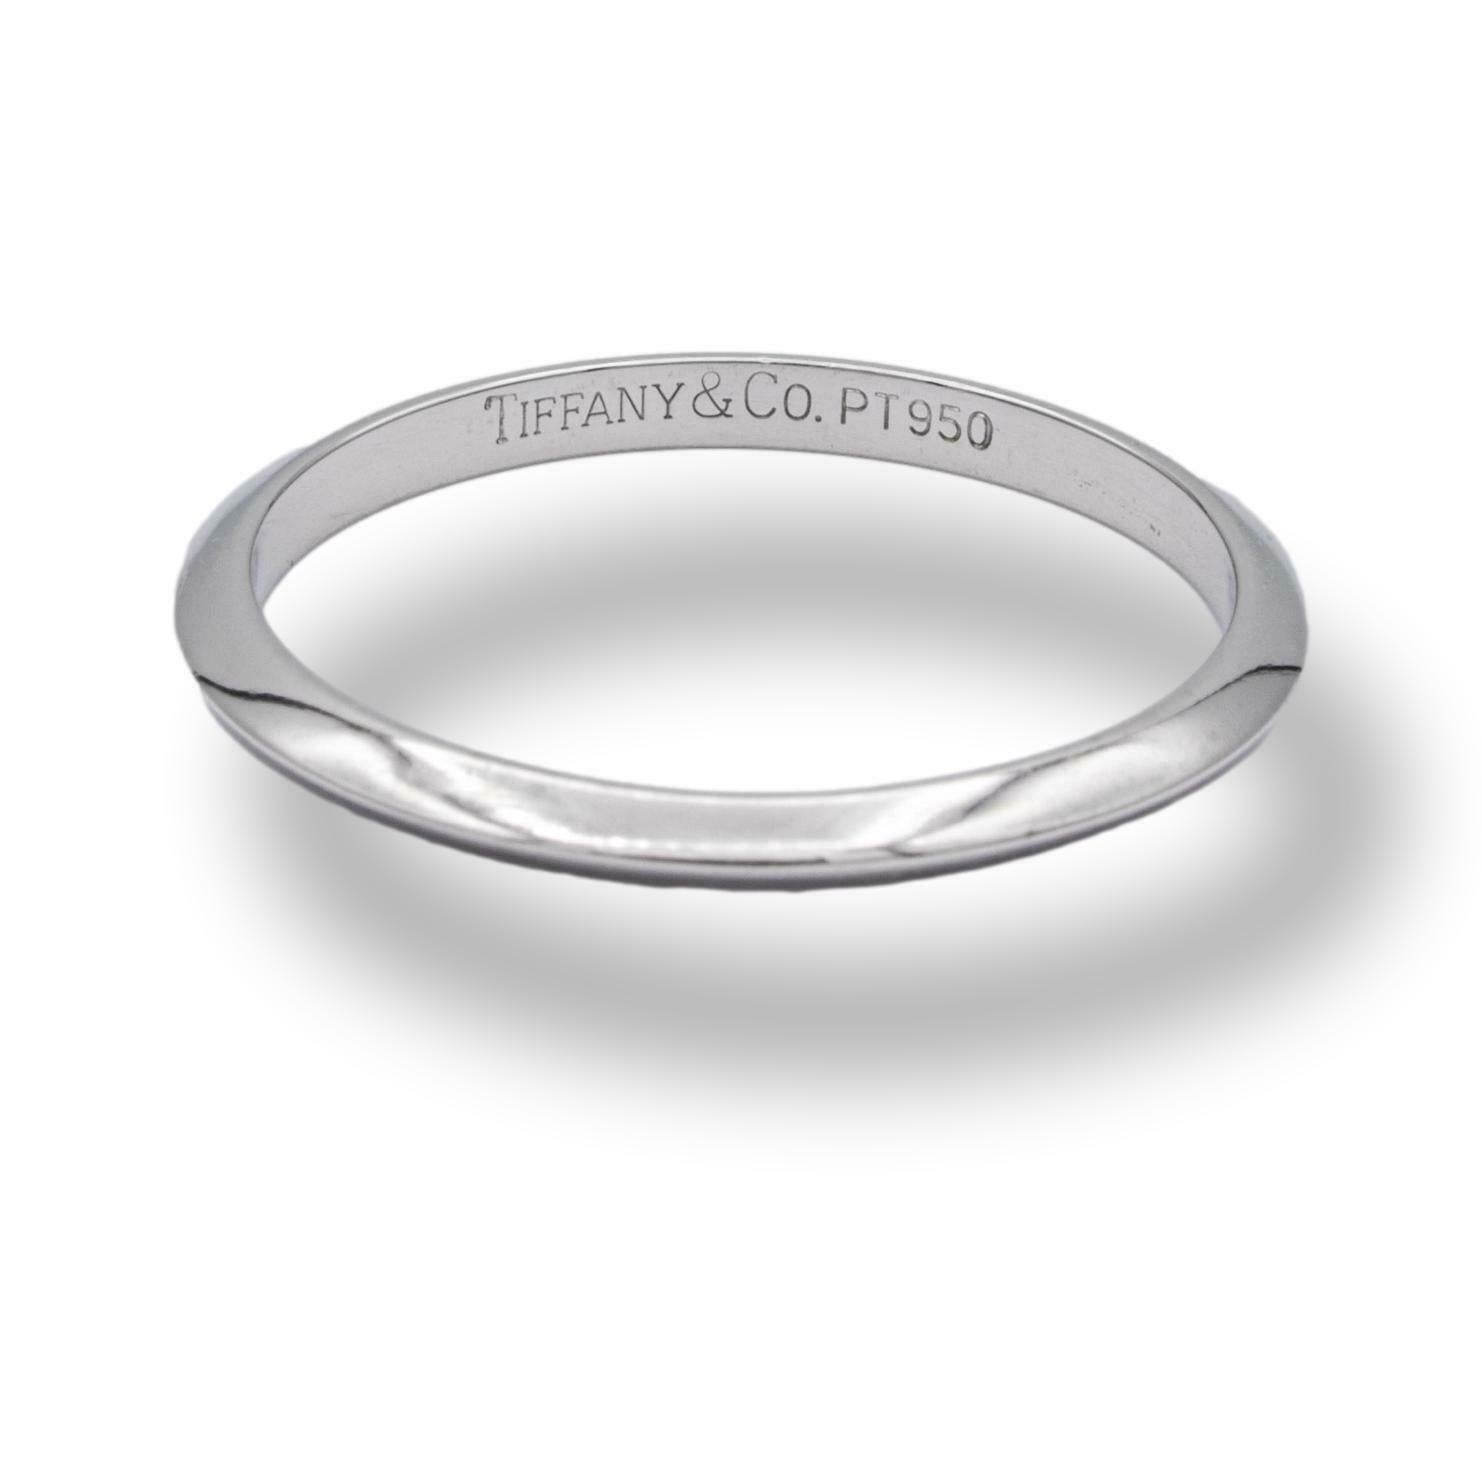 Tiffany & Co. Platinum 2mm Knife-Edge wedding band ring finely crafted in platinum.
Fully hallmarked with logo and metal content.

Ring Specifications
Brand: Tiffany & Co. 
Style: Knife-Edge
Hallmarks:  Tiffany & Co. PT950
Metal: Platinum
Finger